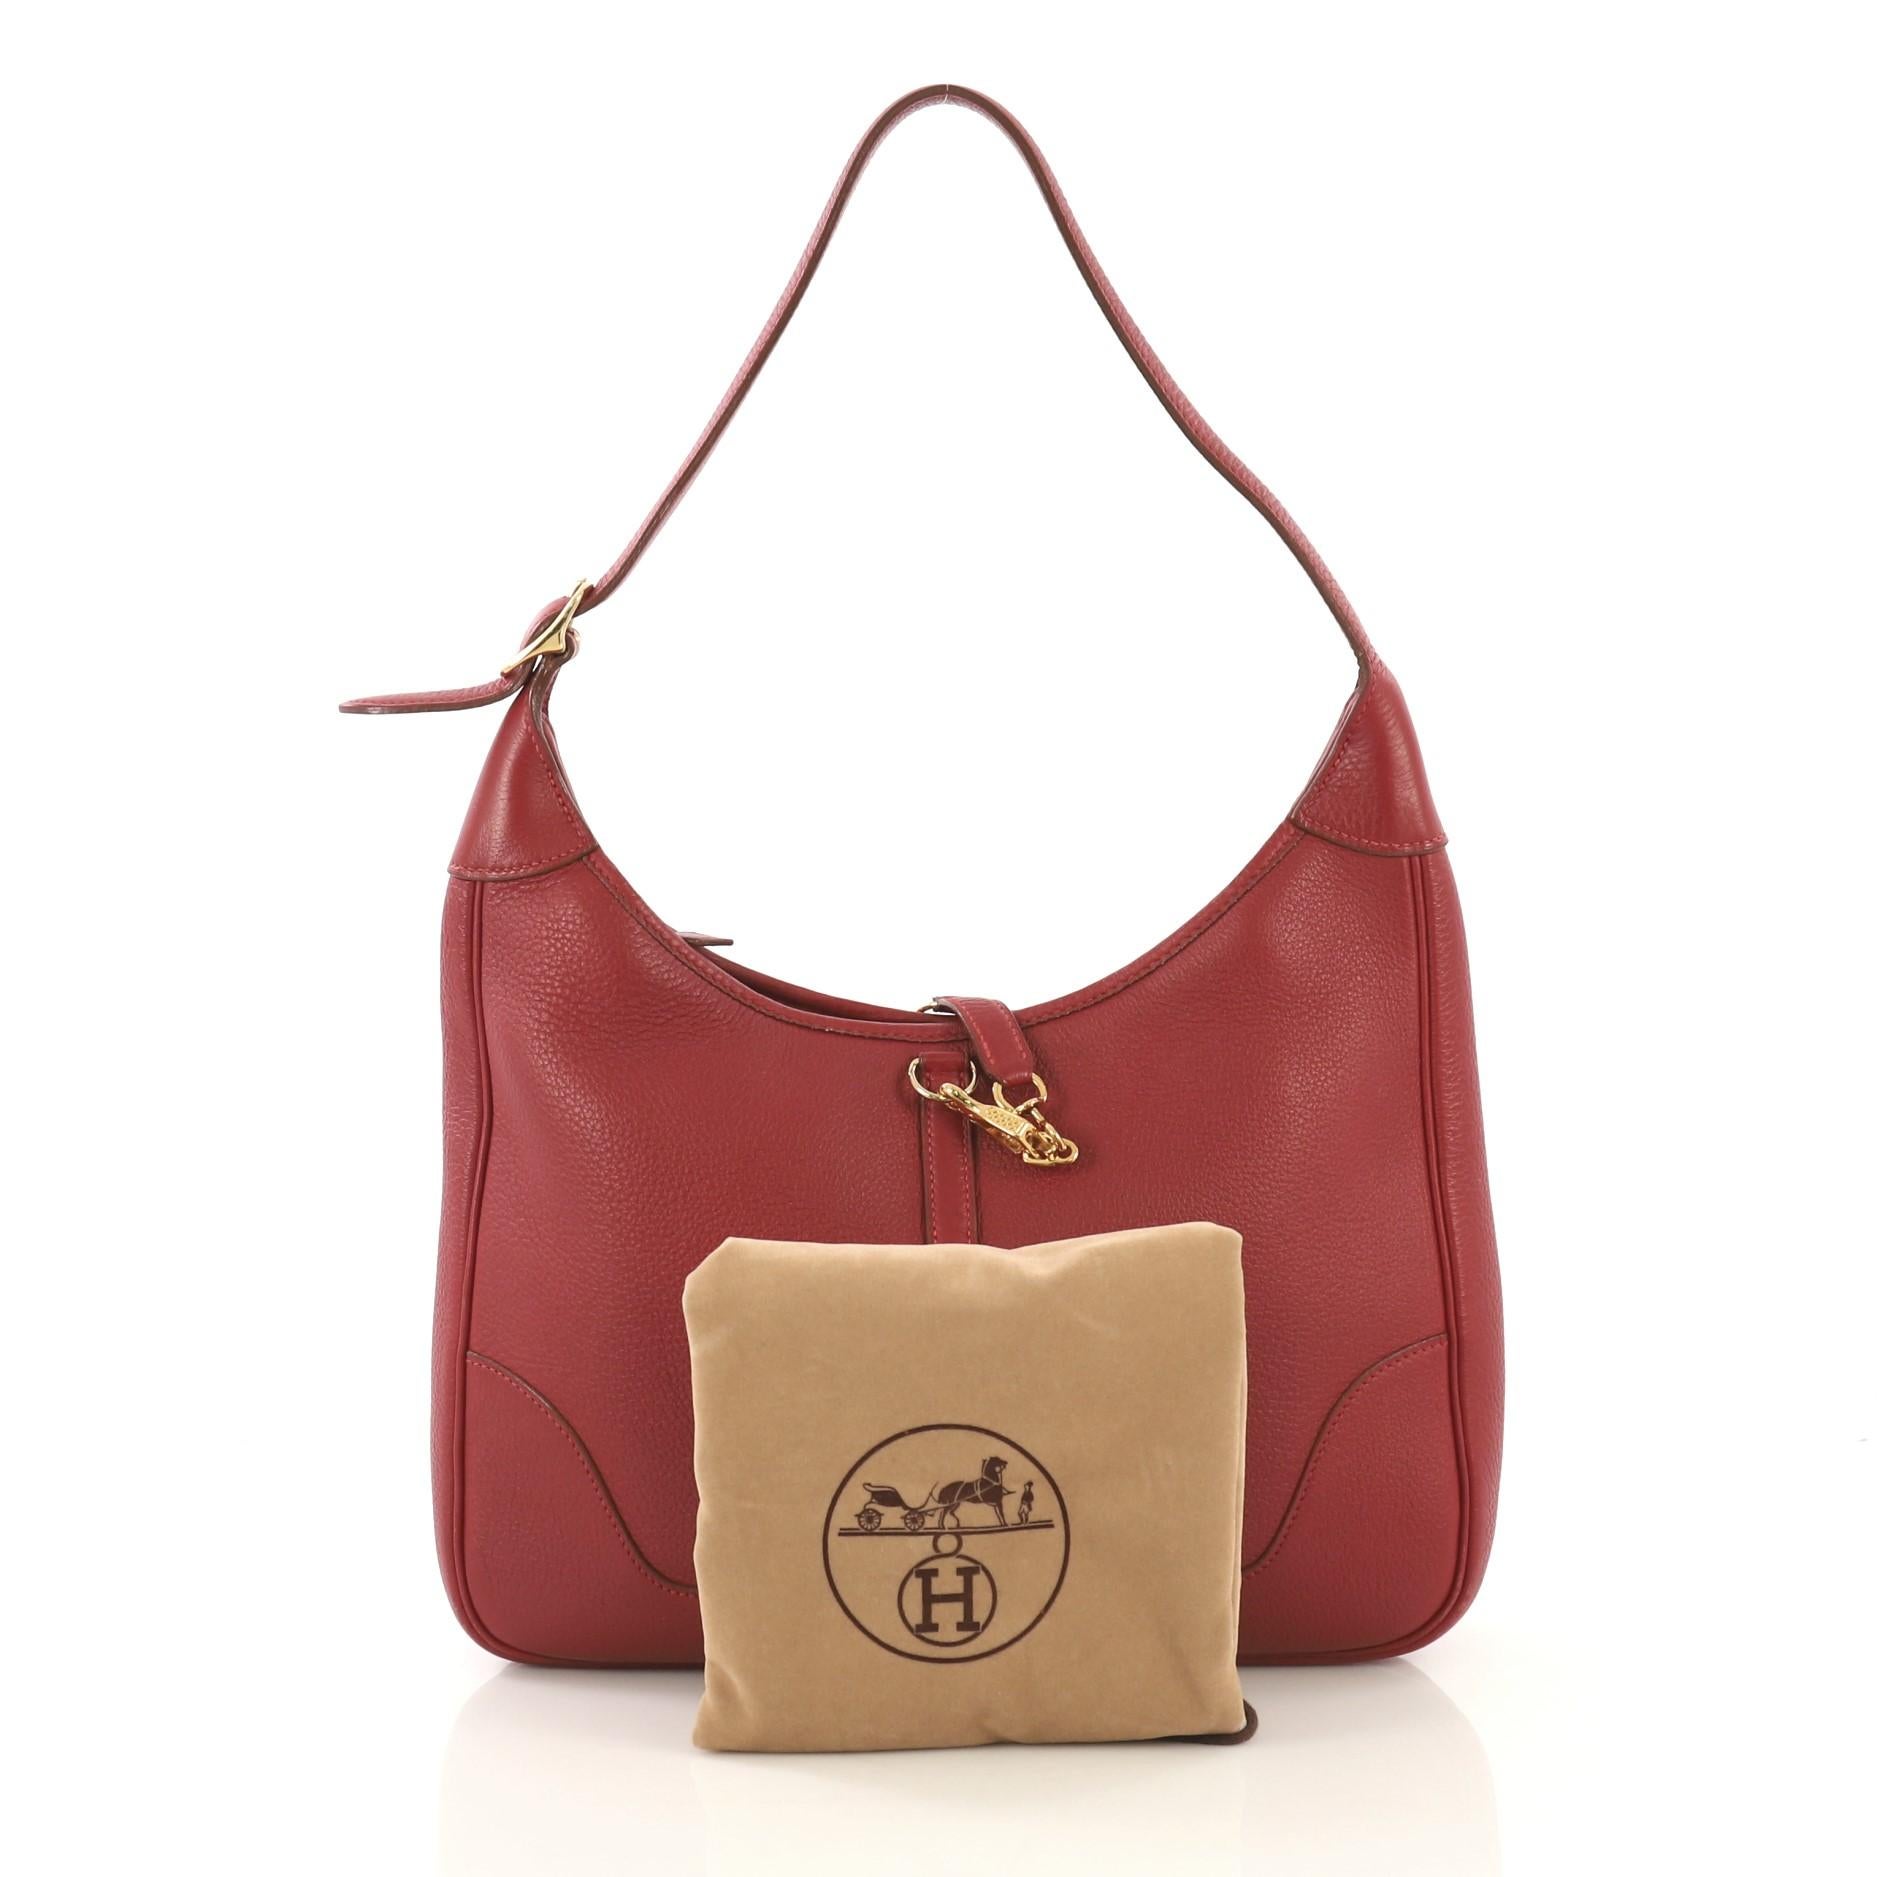 This Hermes Trim II Bag Clemence 31, crafted in Rouge Vif red Clemence leather, features looped shoulder strap and gold hardware. Its clasp closure opens to a Rouge Vif red raw leather interior with side zip and slip pockets. Date stamp reads: B